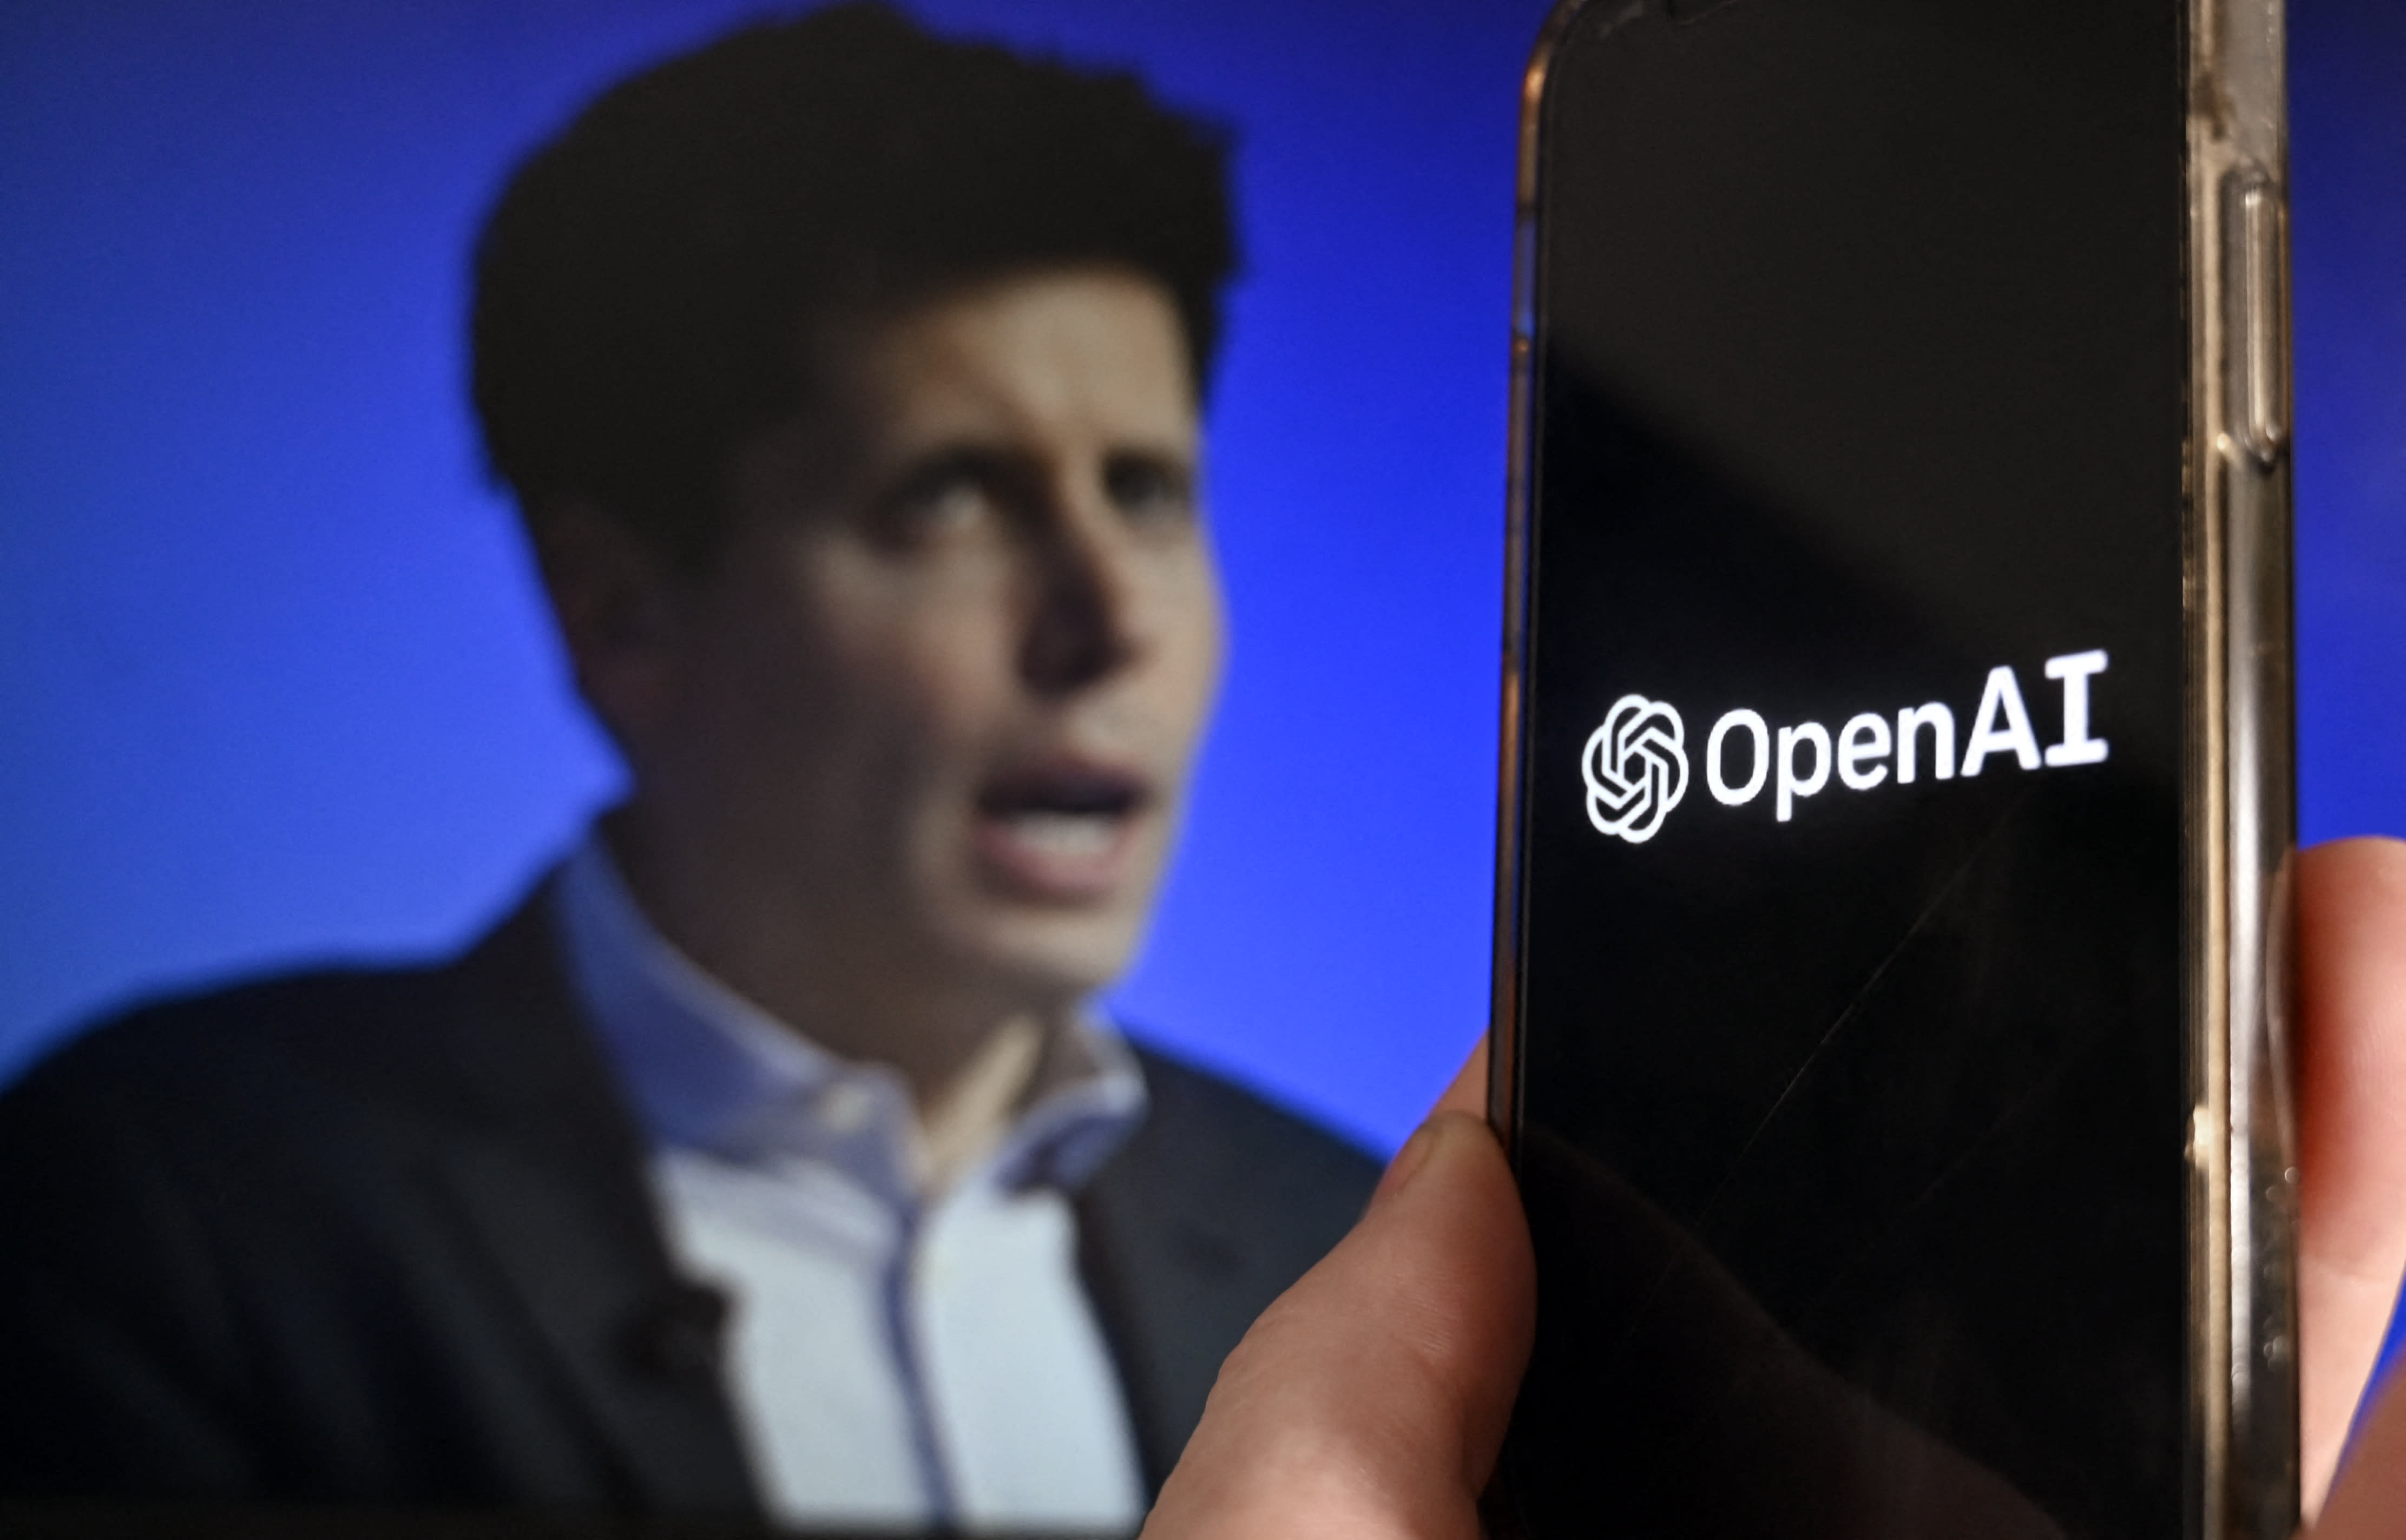 Watch a timeline of the drama between Sam Altman, OpenAI and Microsoft